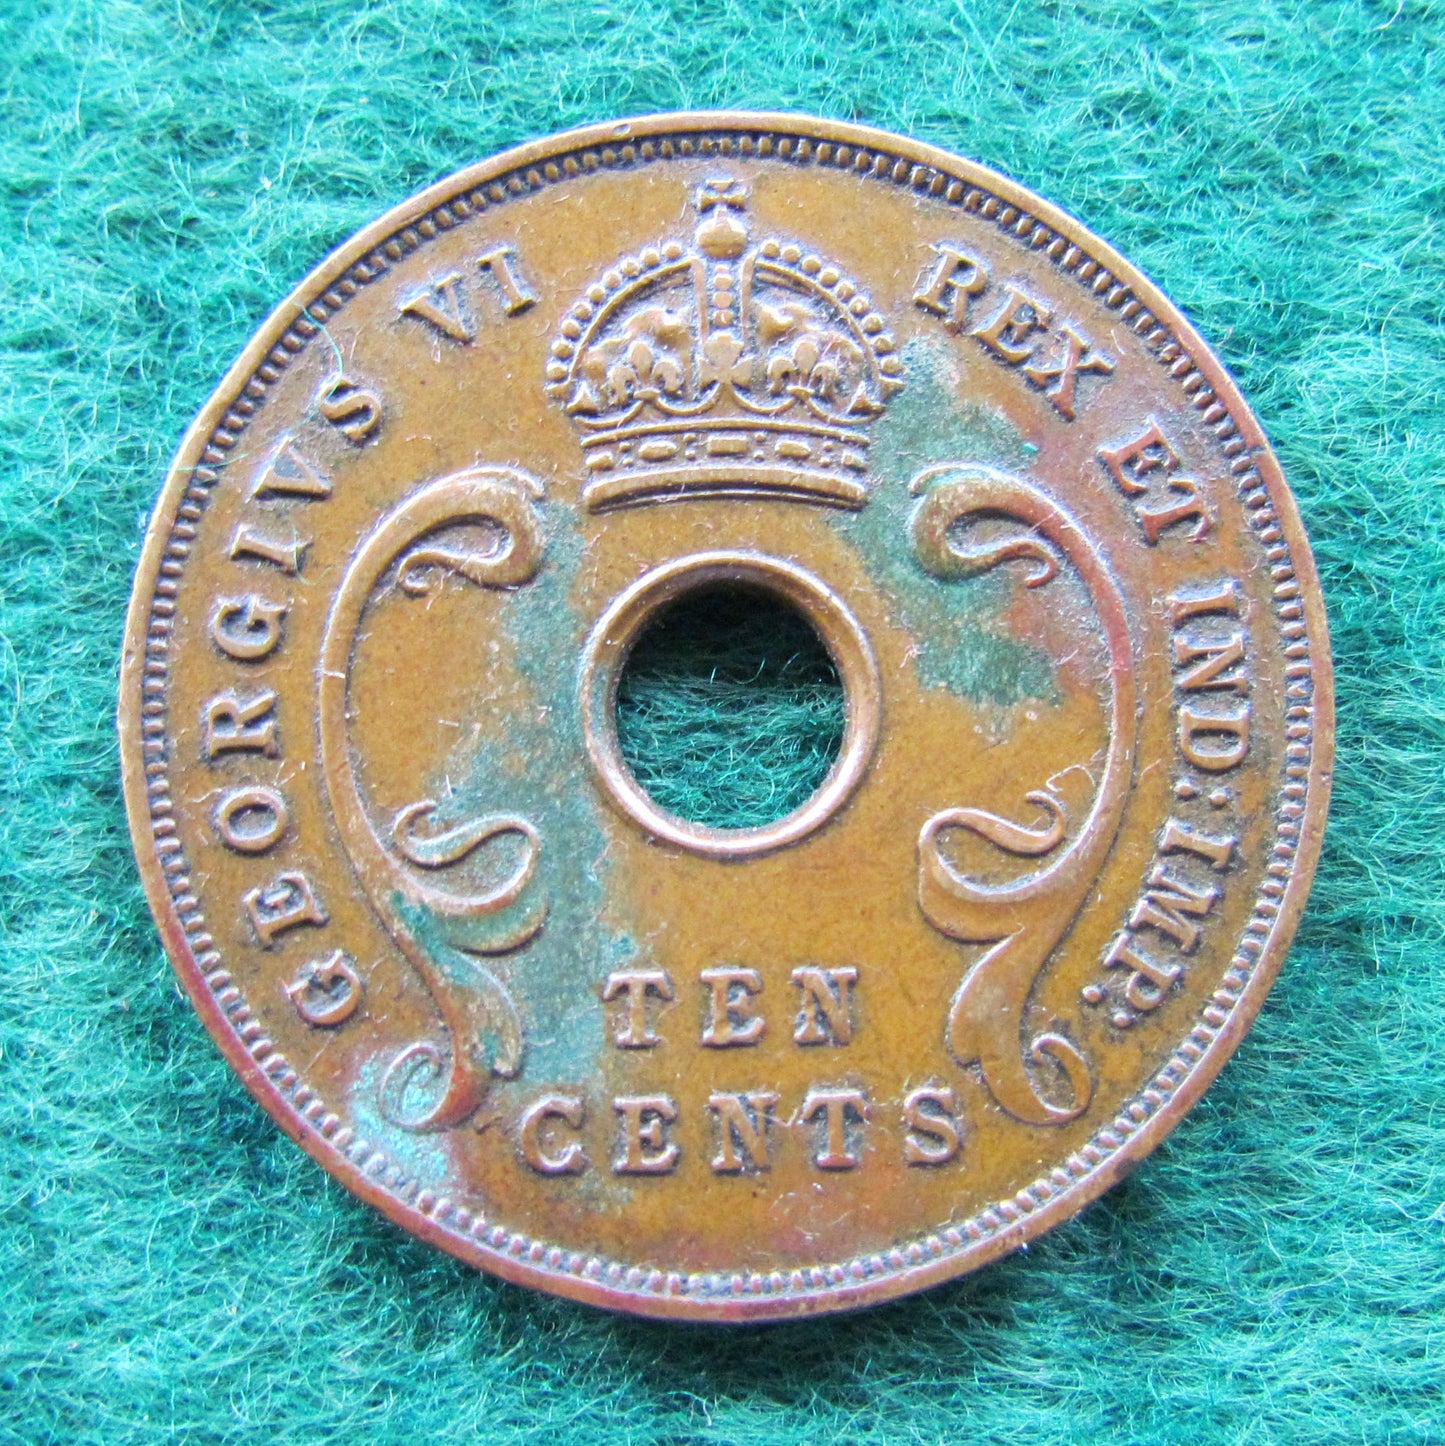 East Africa 1937 10 Cent King George VI Coin - Circulated